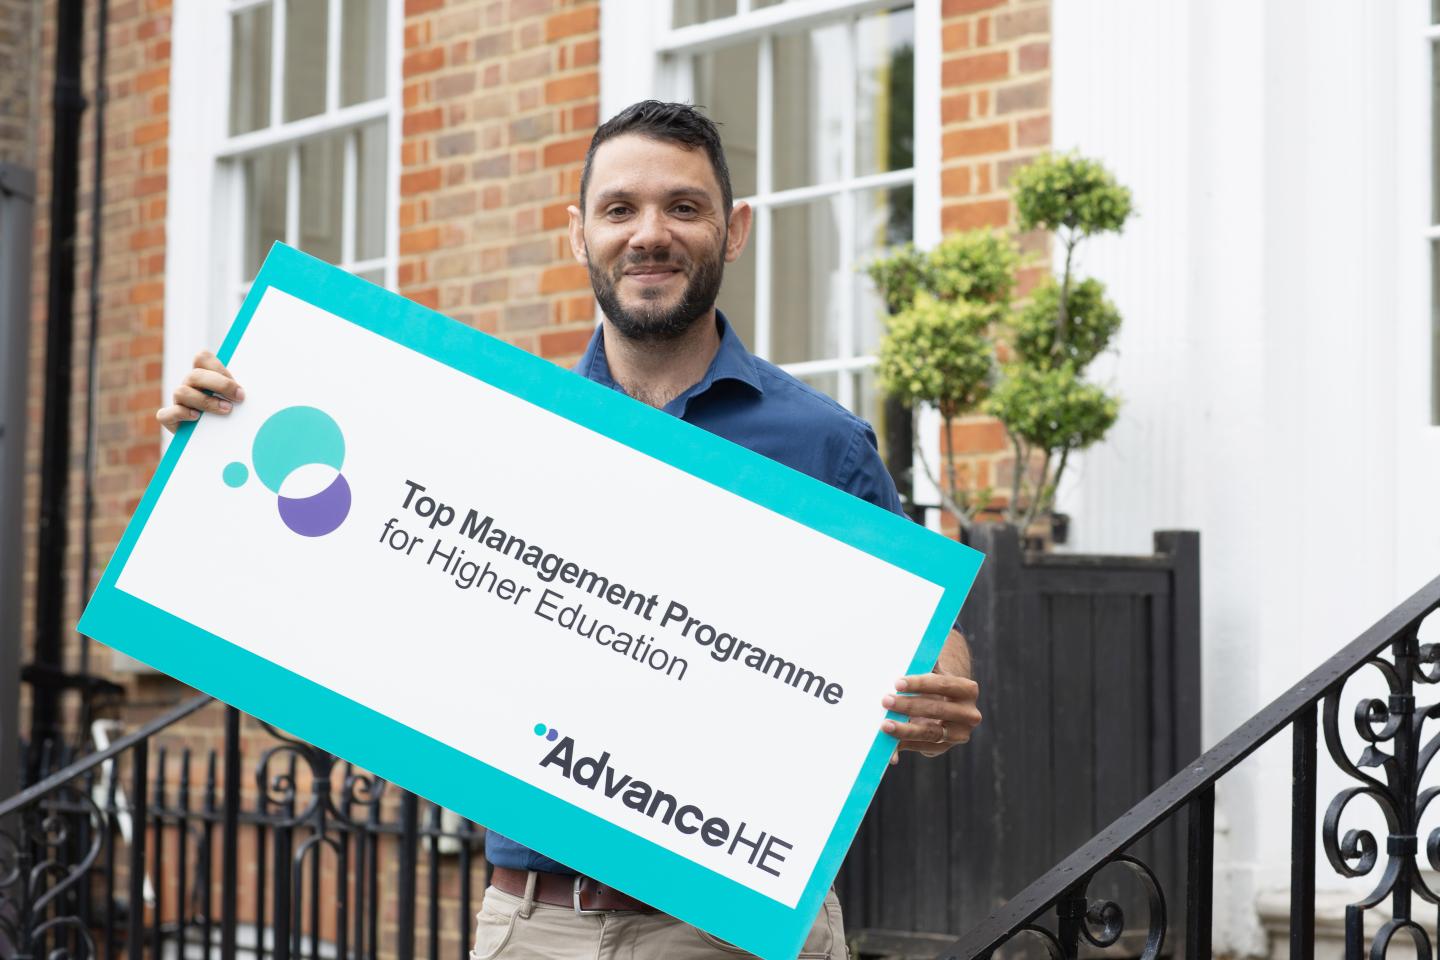 Man holding a banner saying 'Top Management Programme' Advance HE